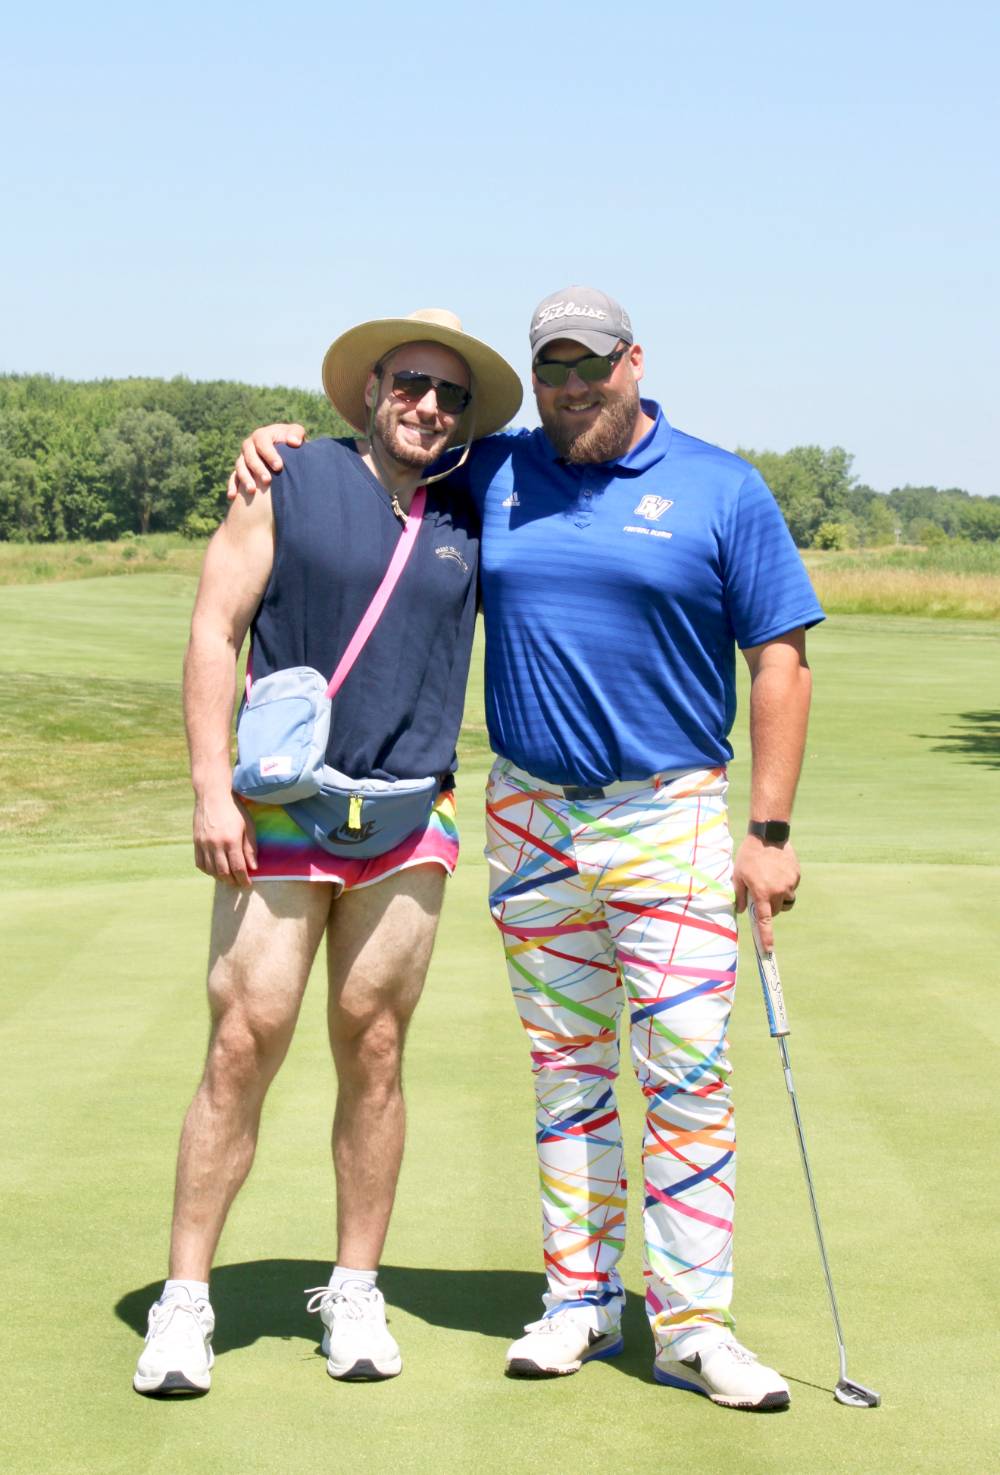 men in funny outfits pose for a photo on the green